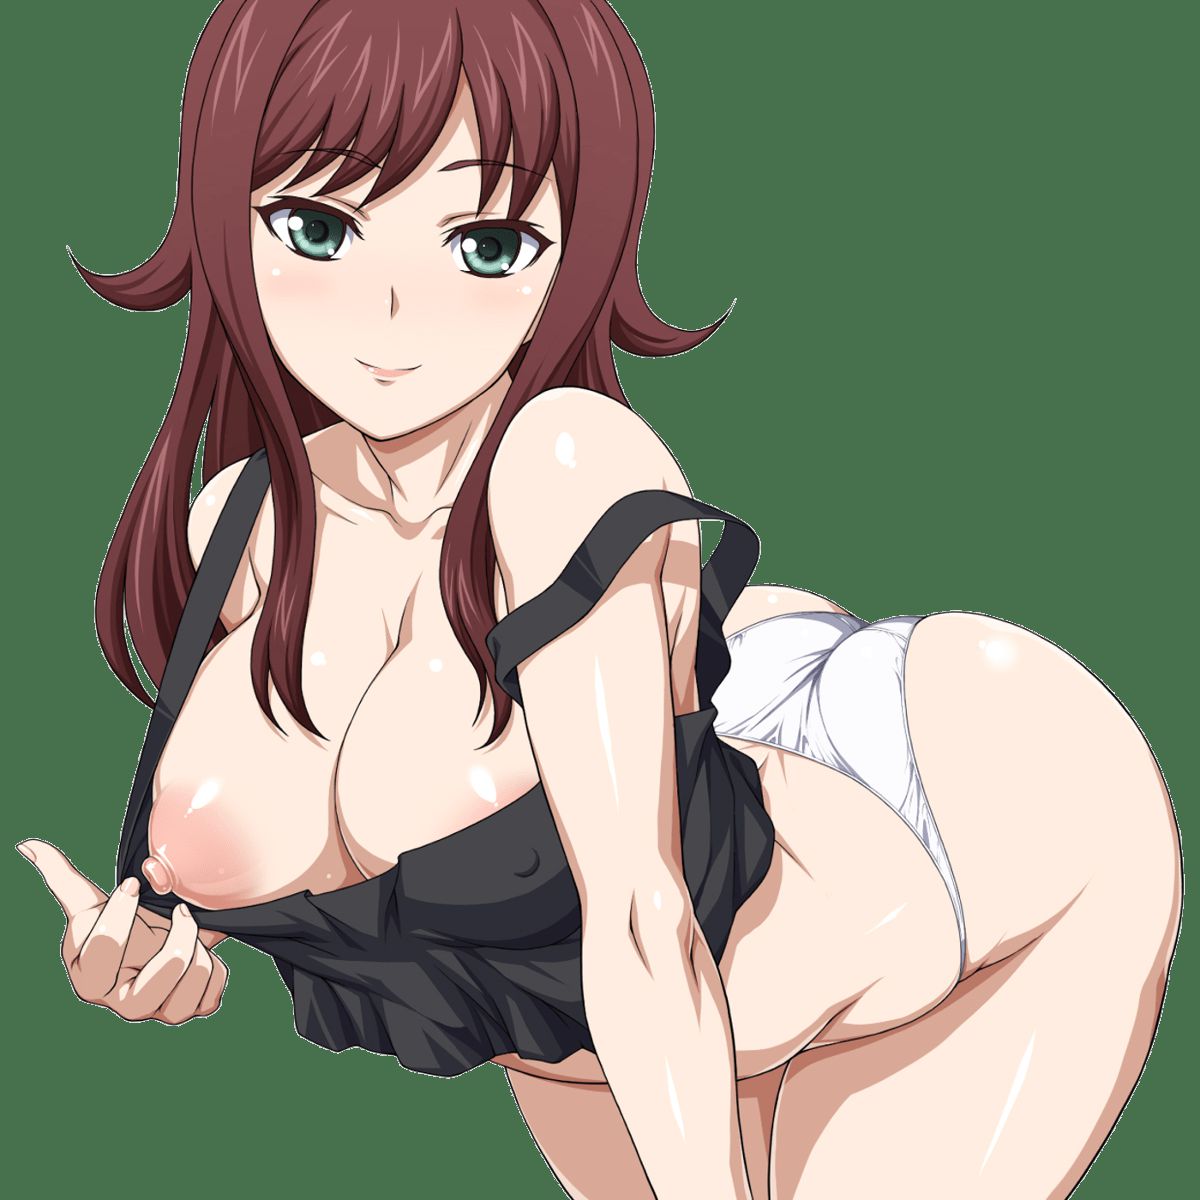 [Anime character material] png background erotic images of anime characters 86 16